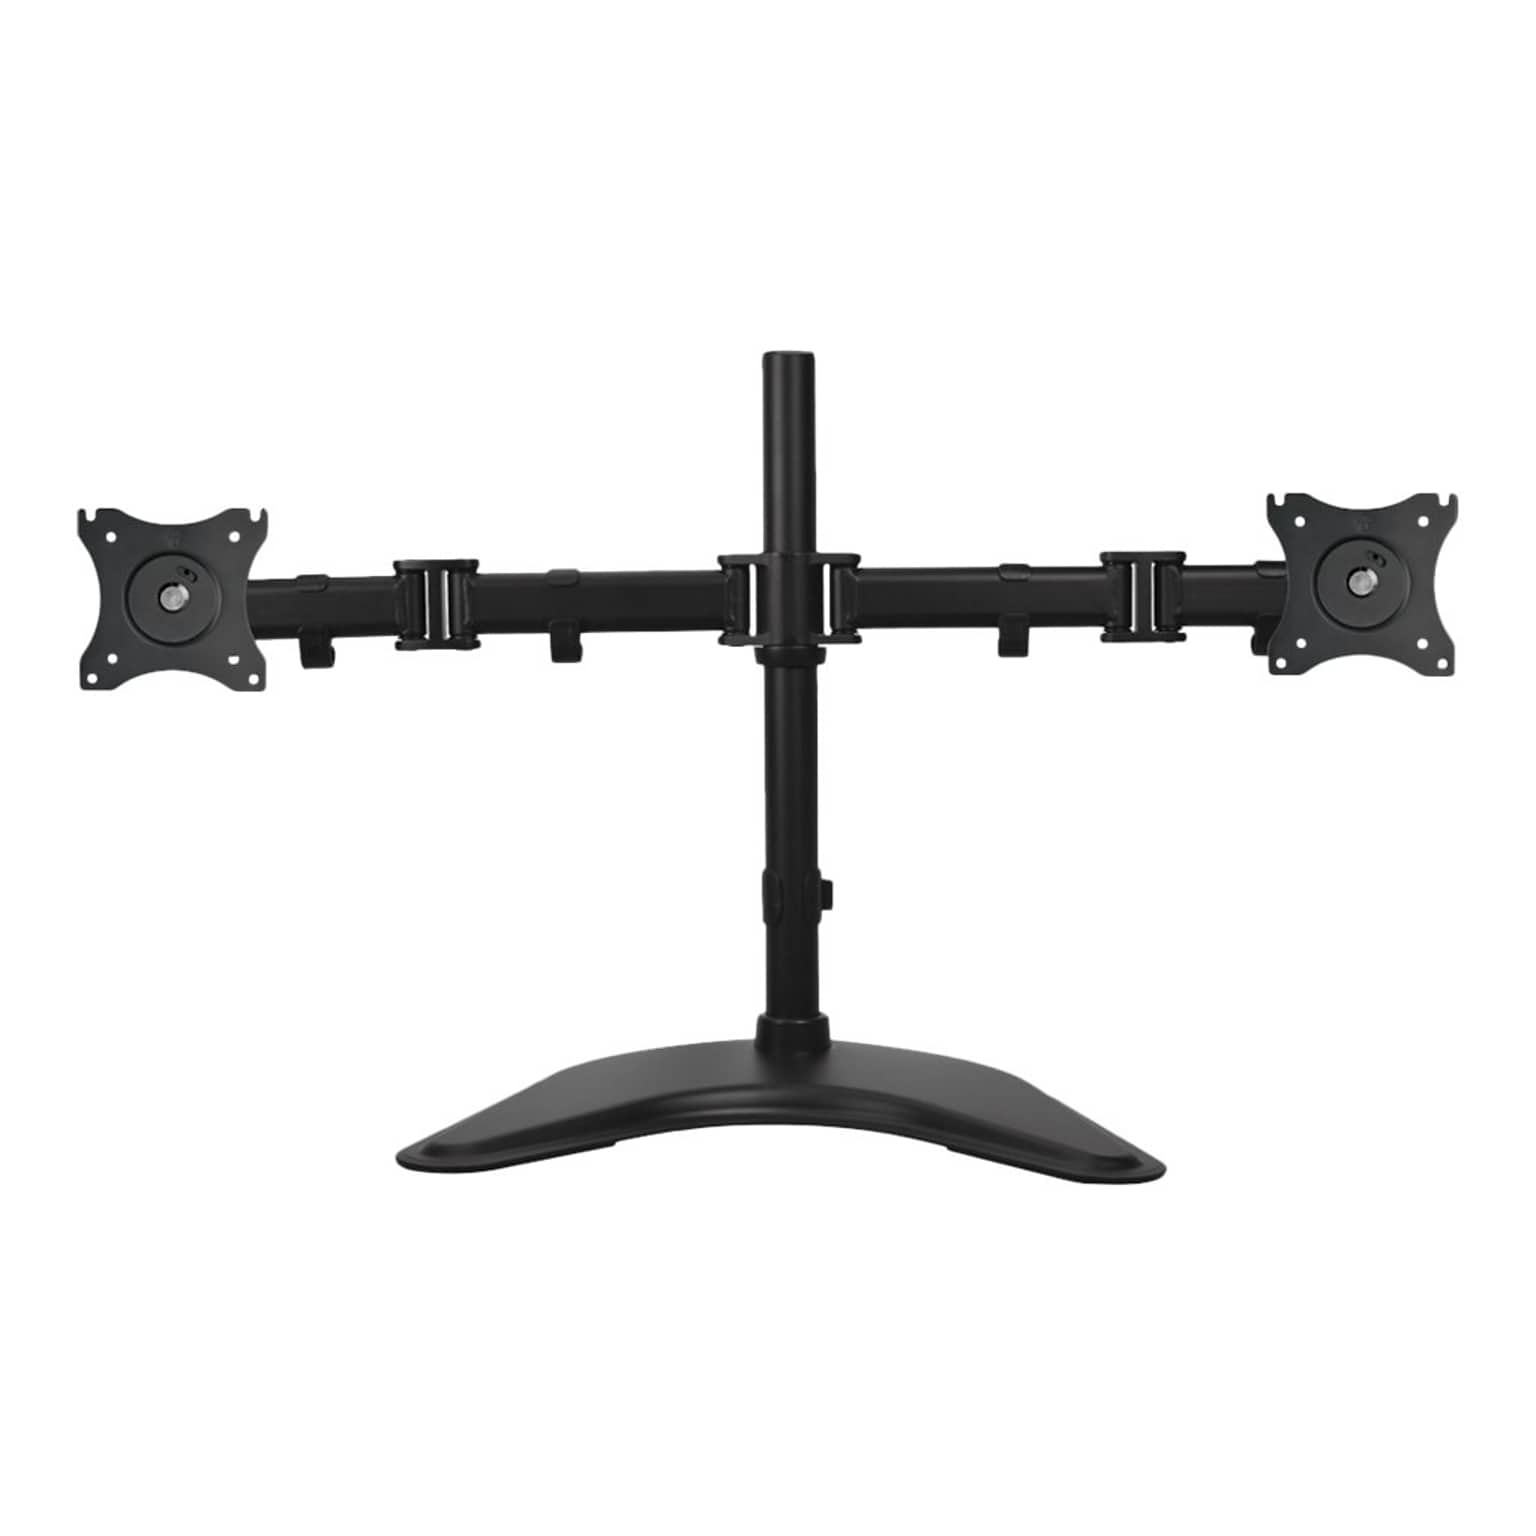 SIIG Articulated Freestanding Dual Monitor Desk Stand - 13-27 Mounting kit, Up to 27, Black (CE-MT1U12-S1)